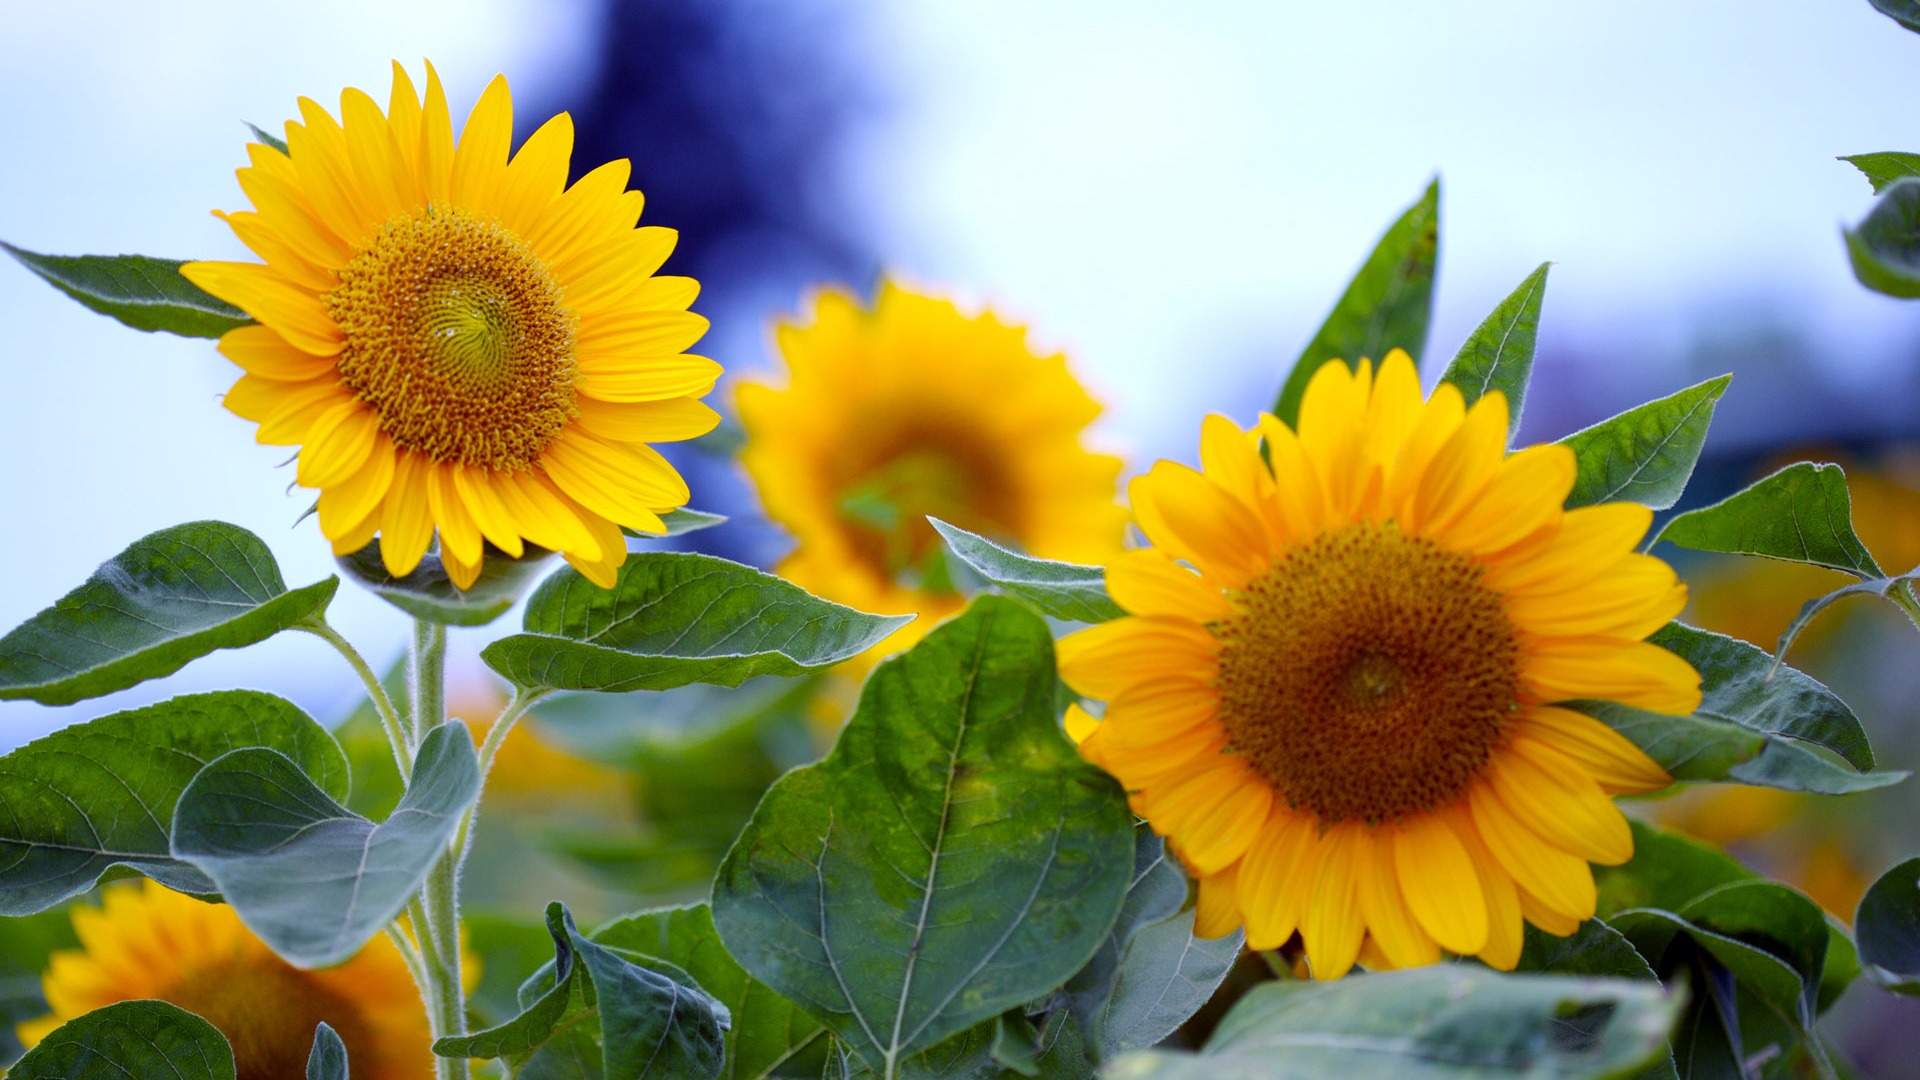 Sunny sunflower photo HD Wallpapers #23 - 1920x1080